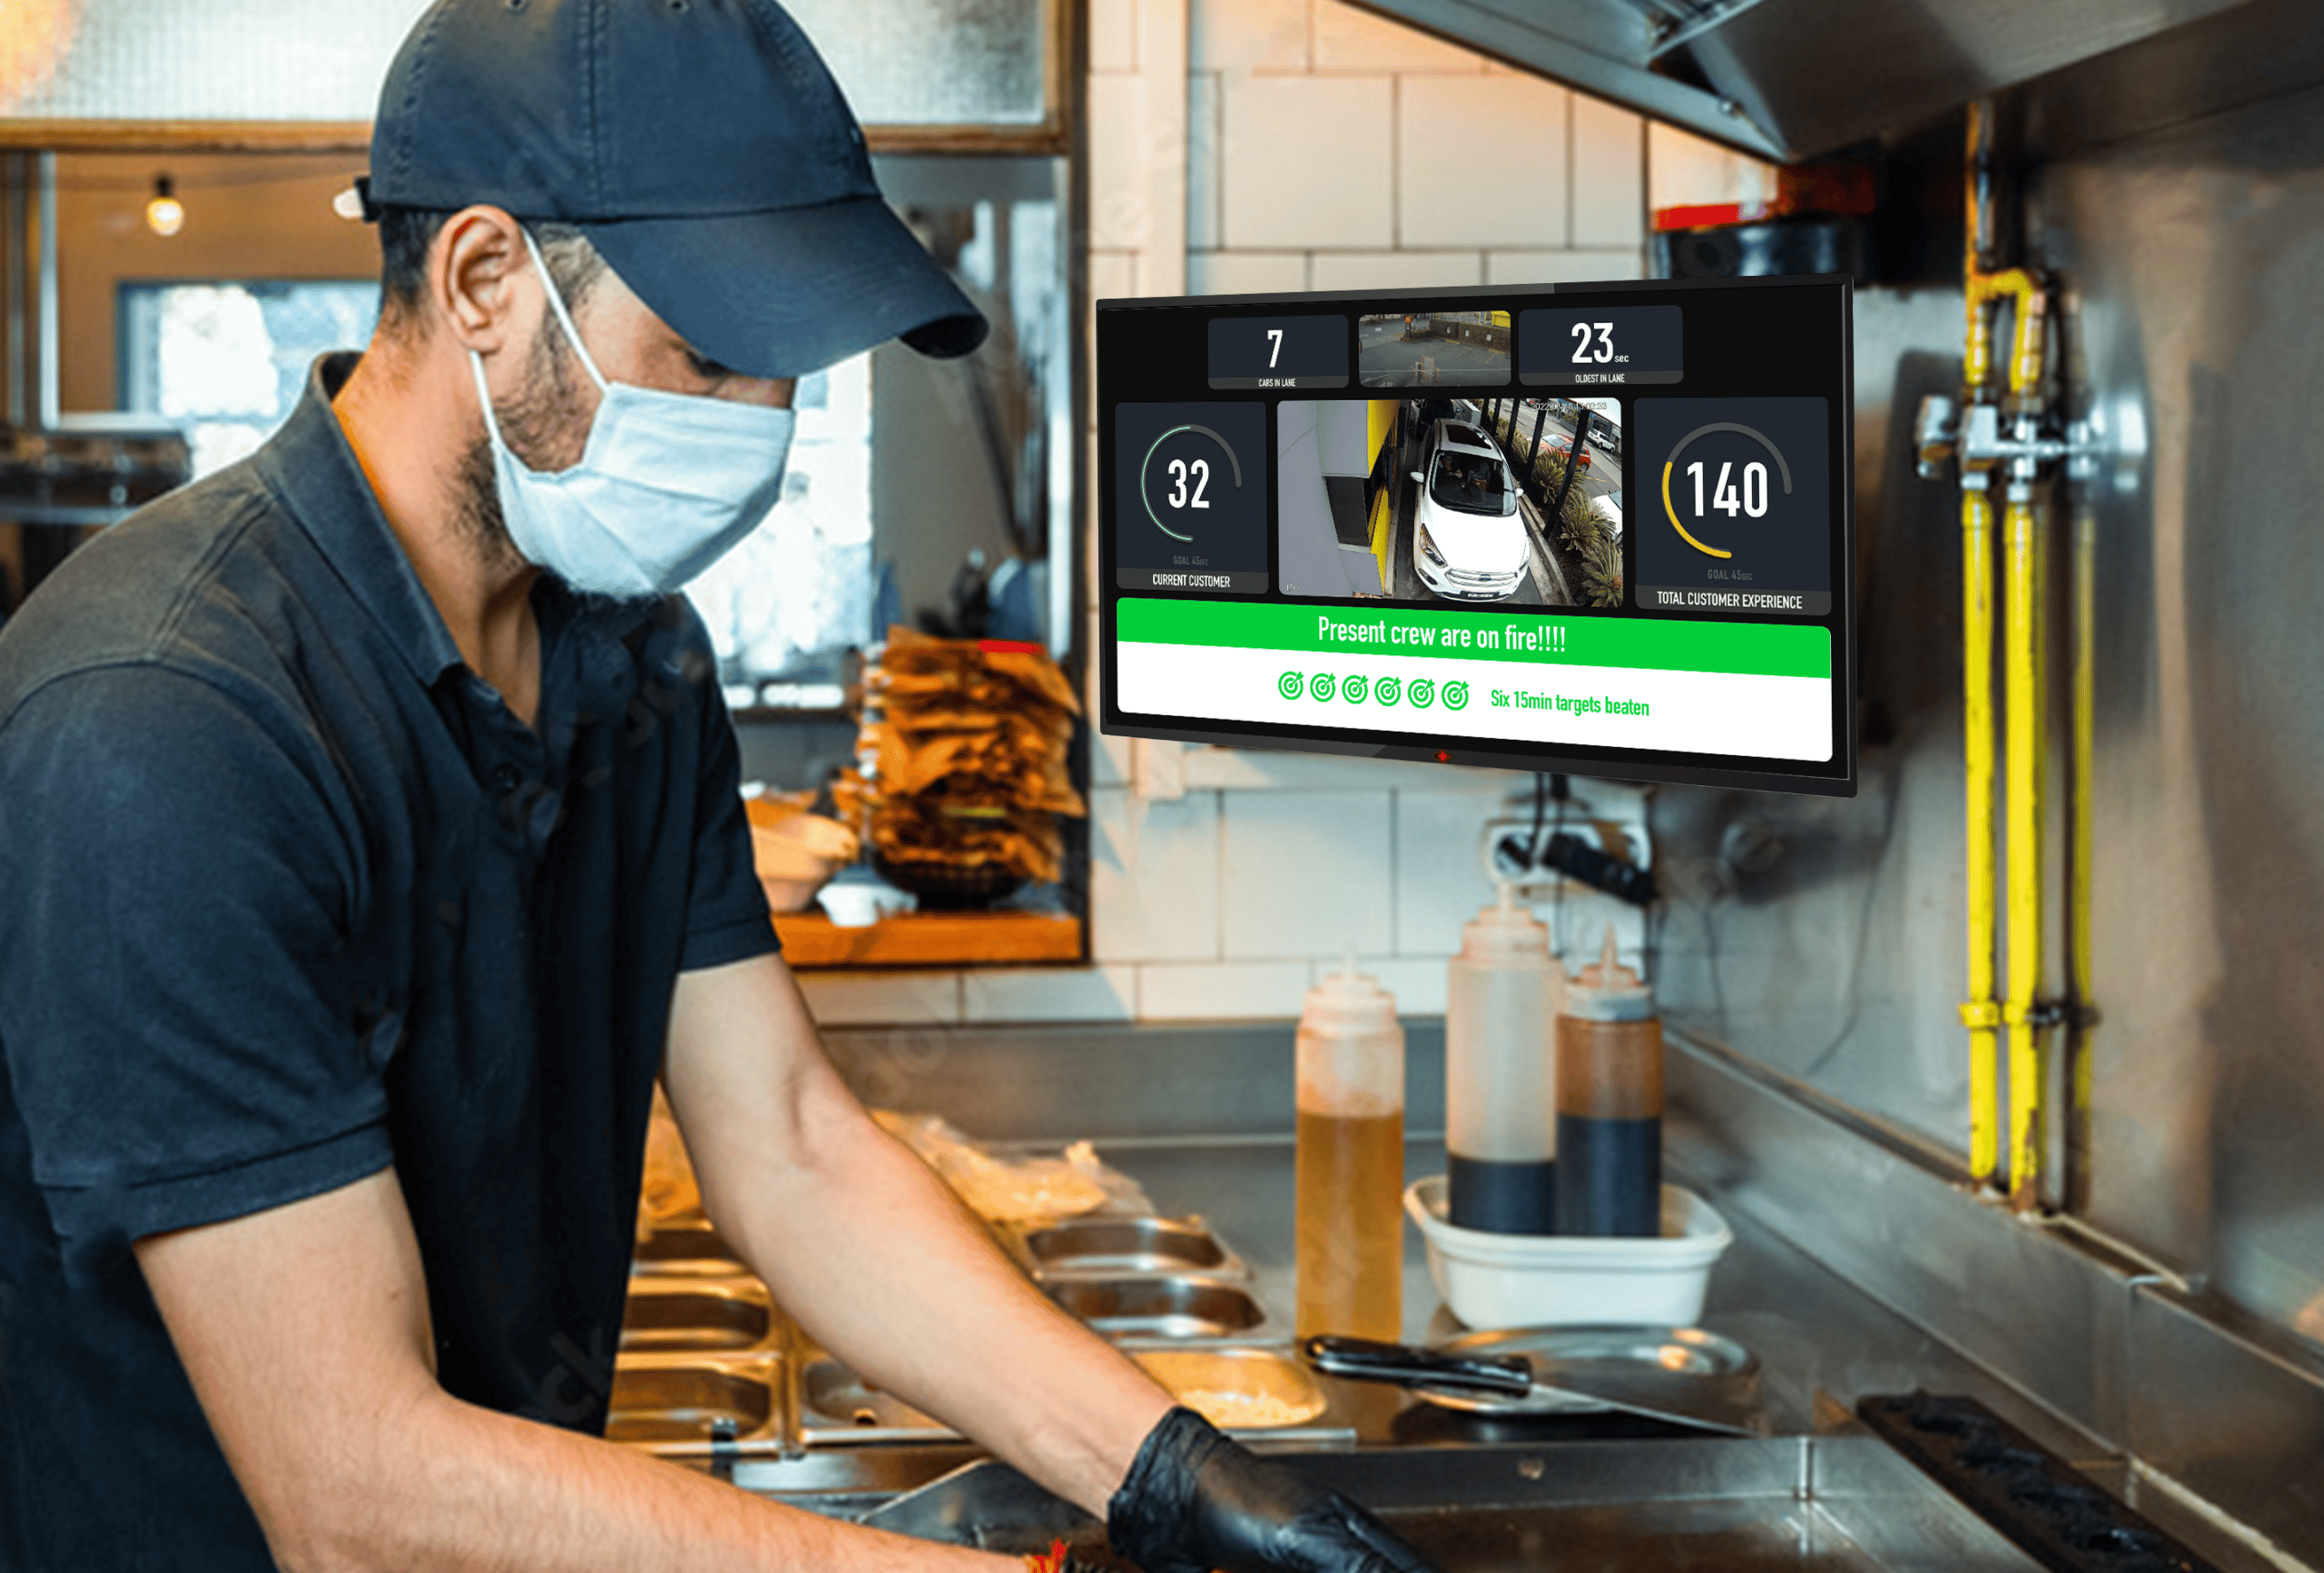 Illustration of the kitchen of a quick-service restaurant. There are appliances for making food, and a window though which servers can hand out orders that are ready. There is a worker holding a digital tablet, and a screen showing a dashboard with digital graphs at the top.